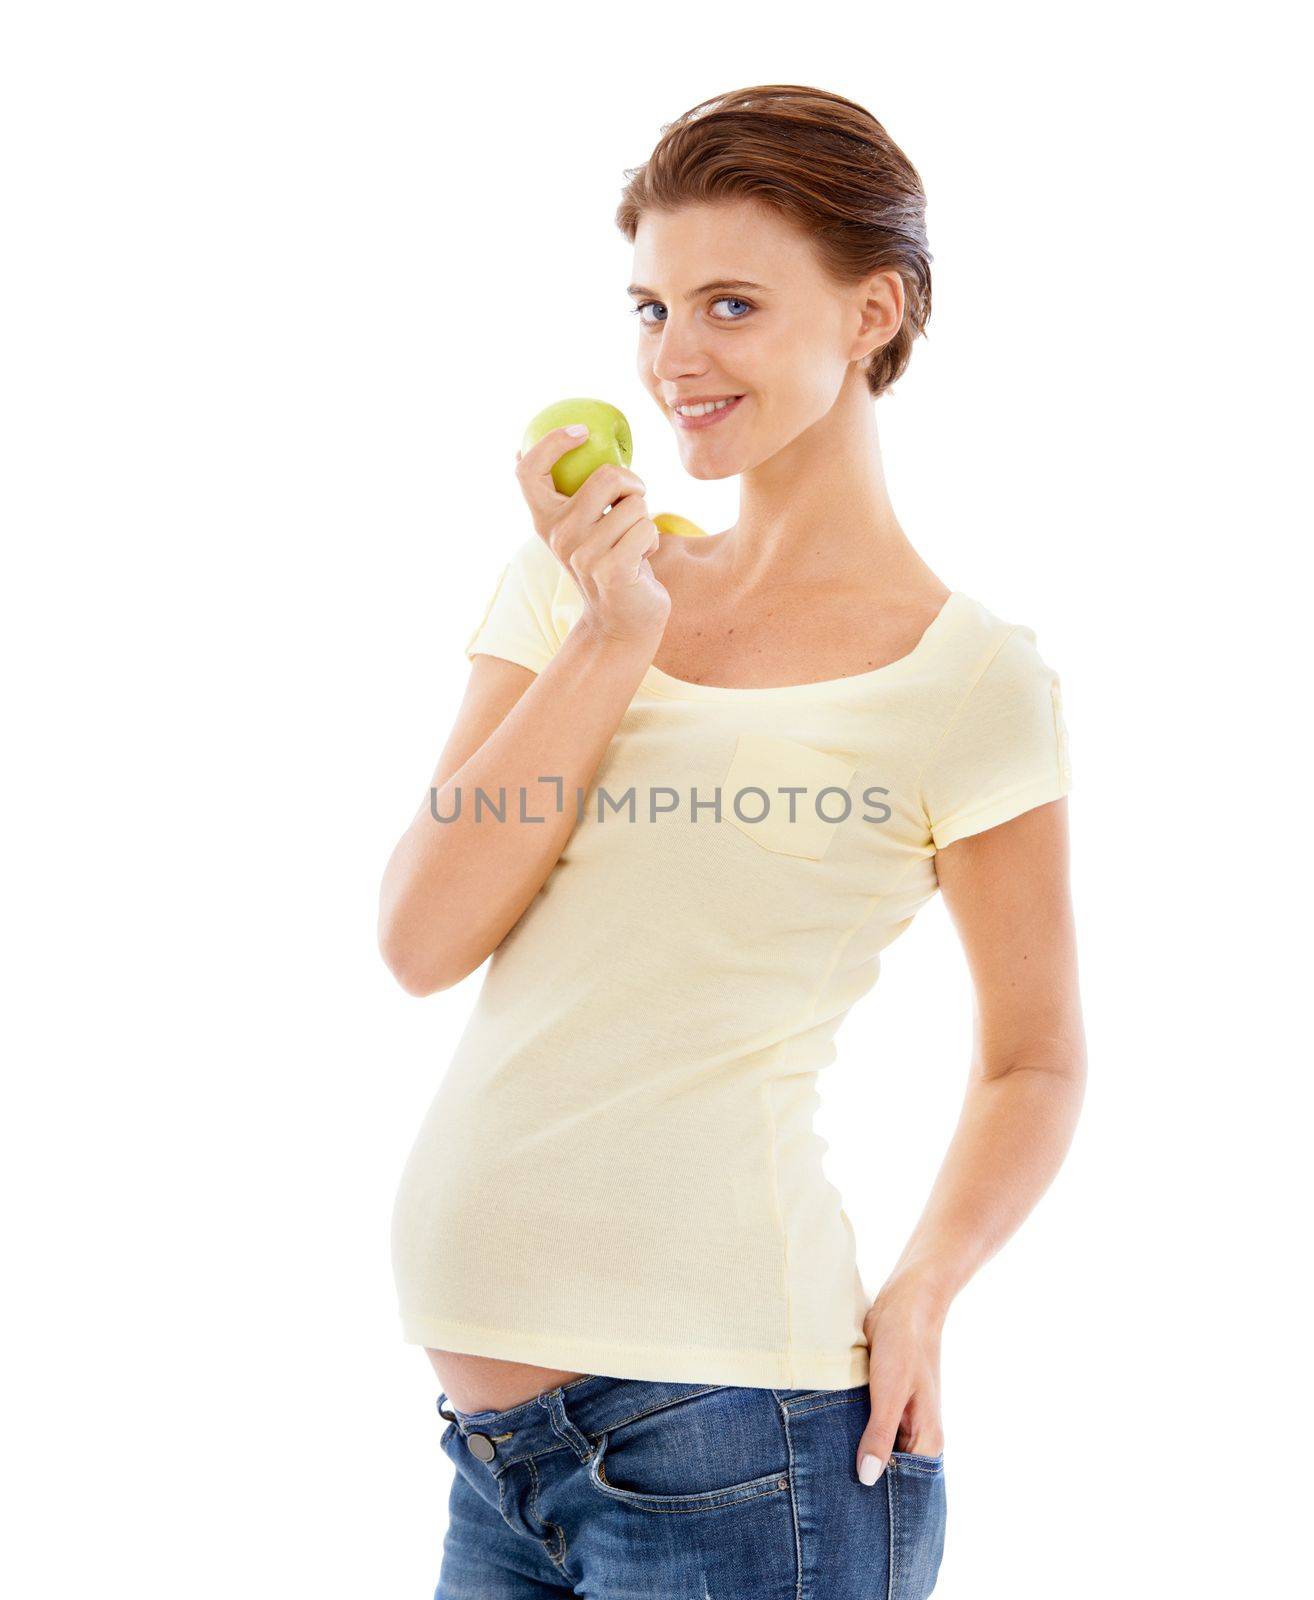 Eating for two now...A pretty pregnant woman holding a green apple while isolated on a white background. by YuriArcurs